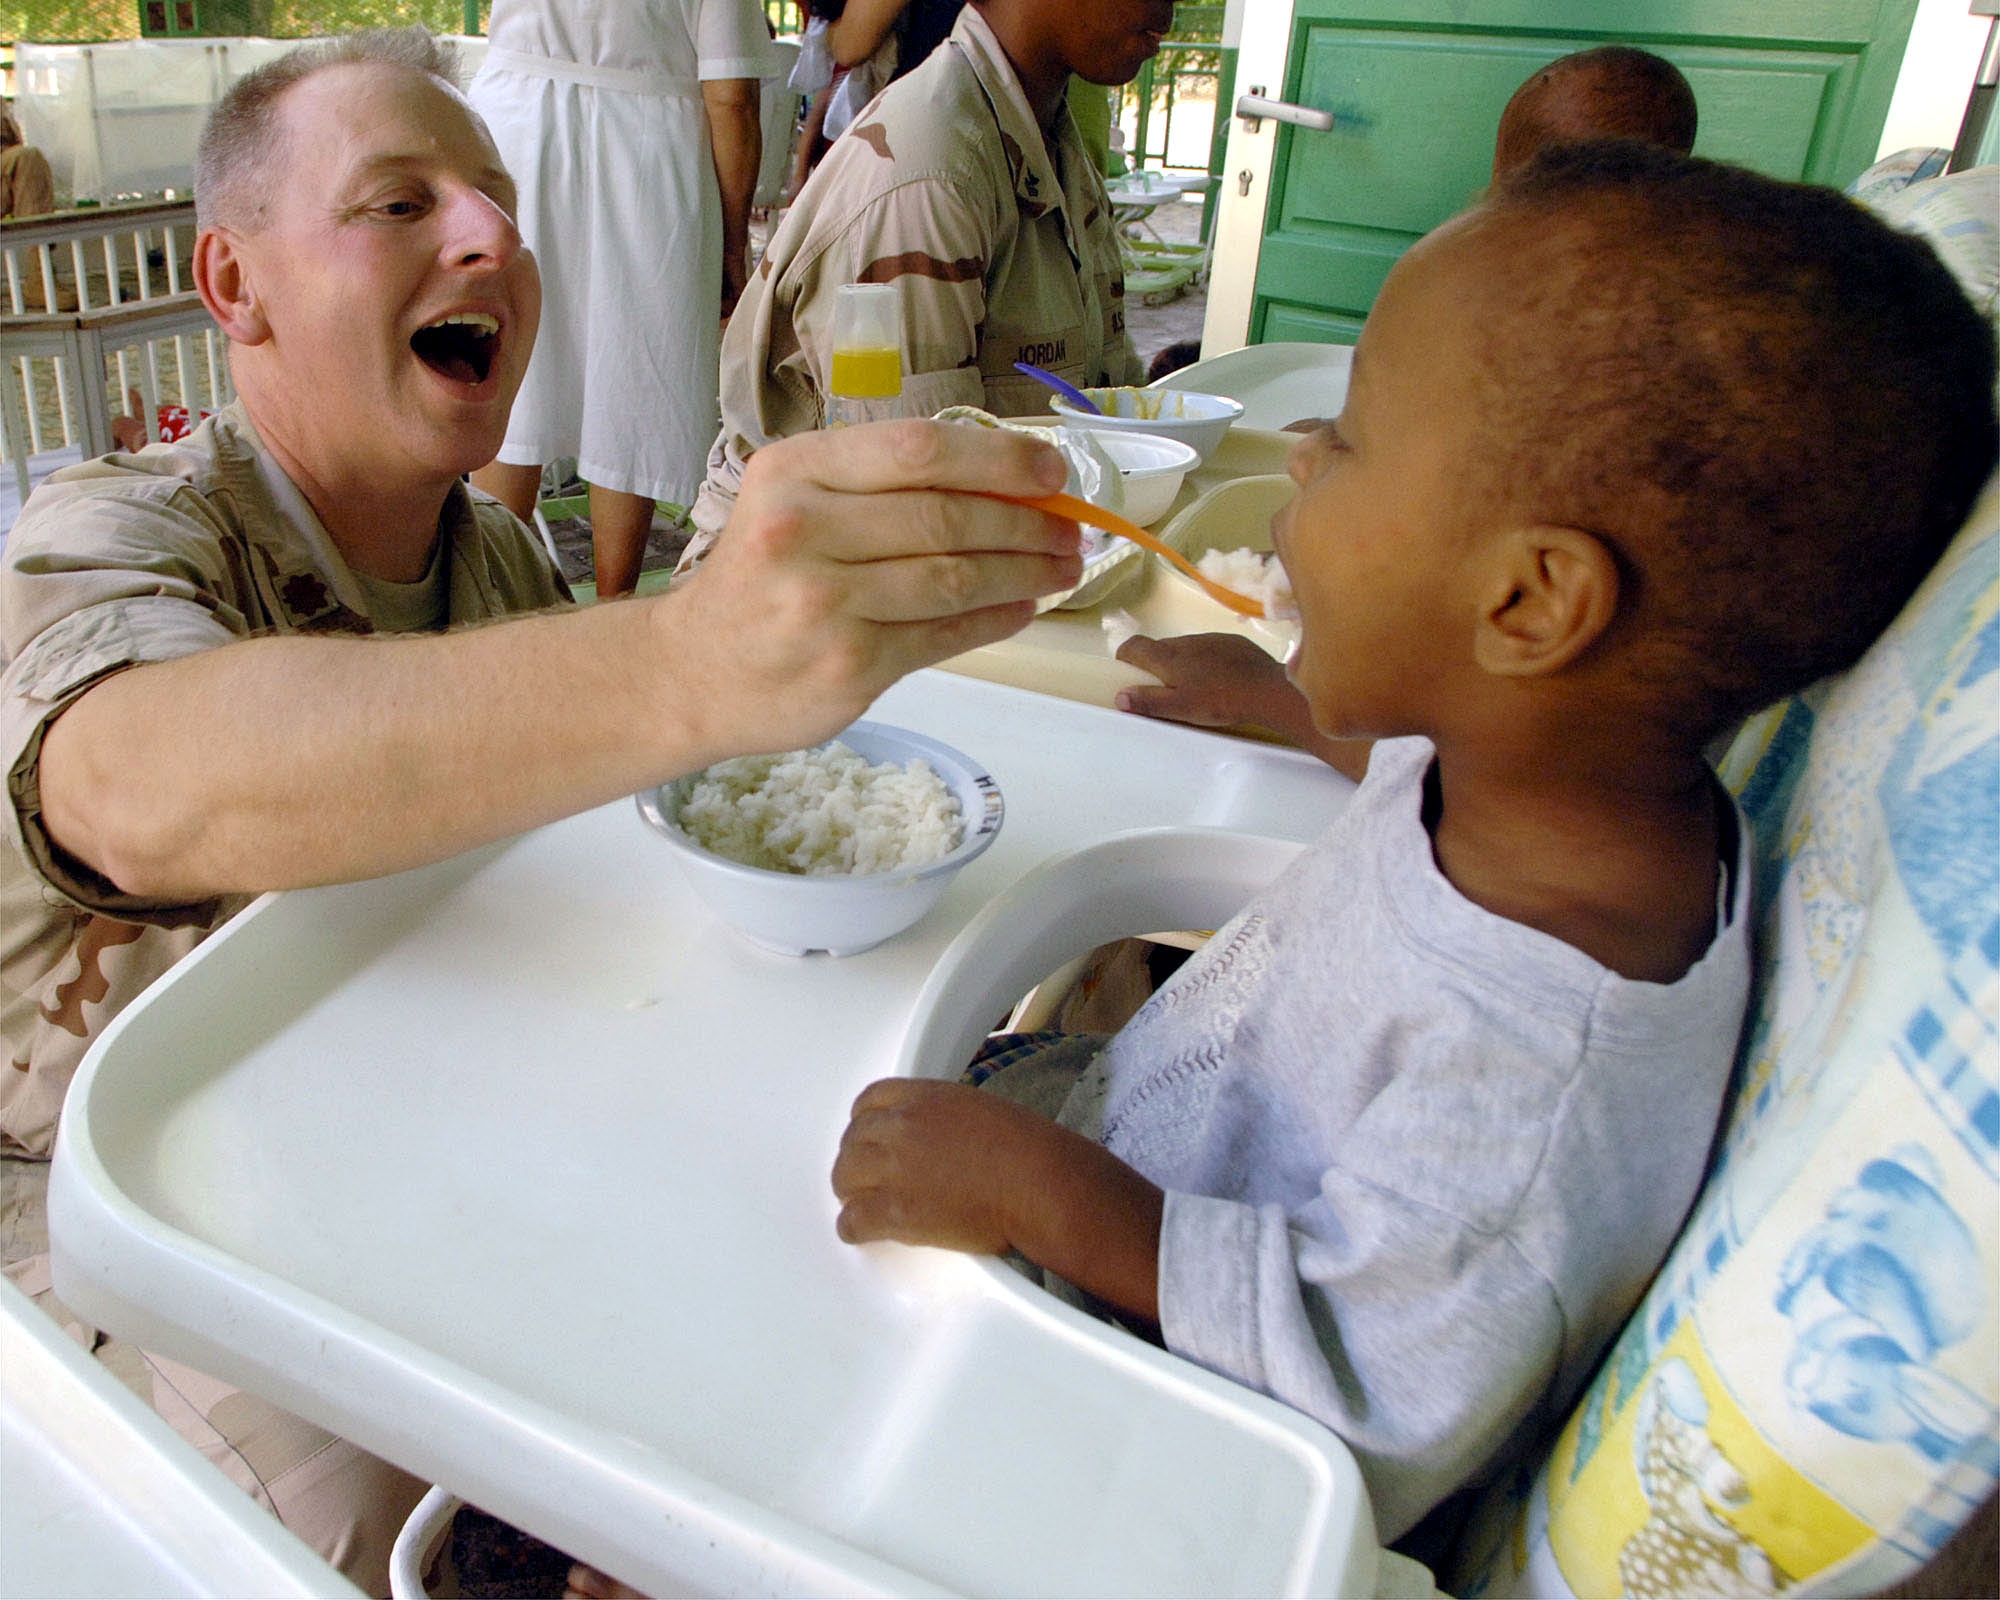 Chaplain (Maj.) Steven O'Brien feeds an orphaned toddler mashed potatoes at the Franciscan Missionaries of Notre Dame Baby Orphanage in Djibouti City, Djibouti. Chaplain O'Brien deployed to Camp Lemonier, Djibouti, from the 4th Air Force at March Air Reserve Base, Calif. The Camp Lemonier chapel staff arranges visits to this orphanage three times a week. (U.S. Air Force photo/by Staff Sgt. Francesca Popp) 
